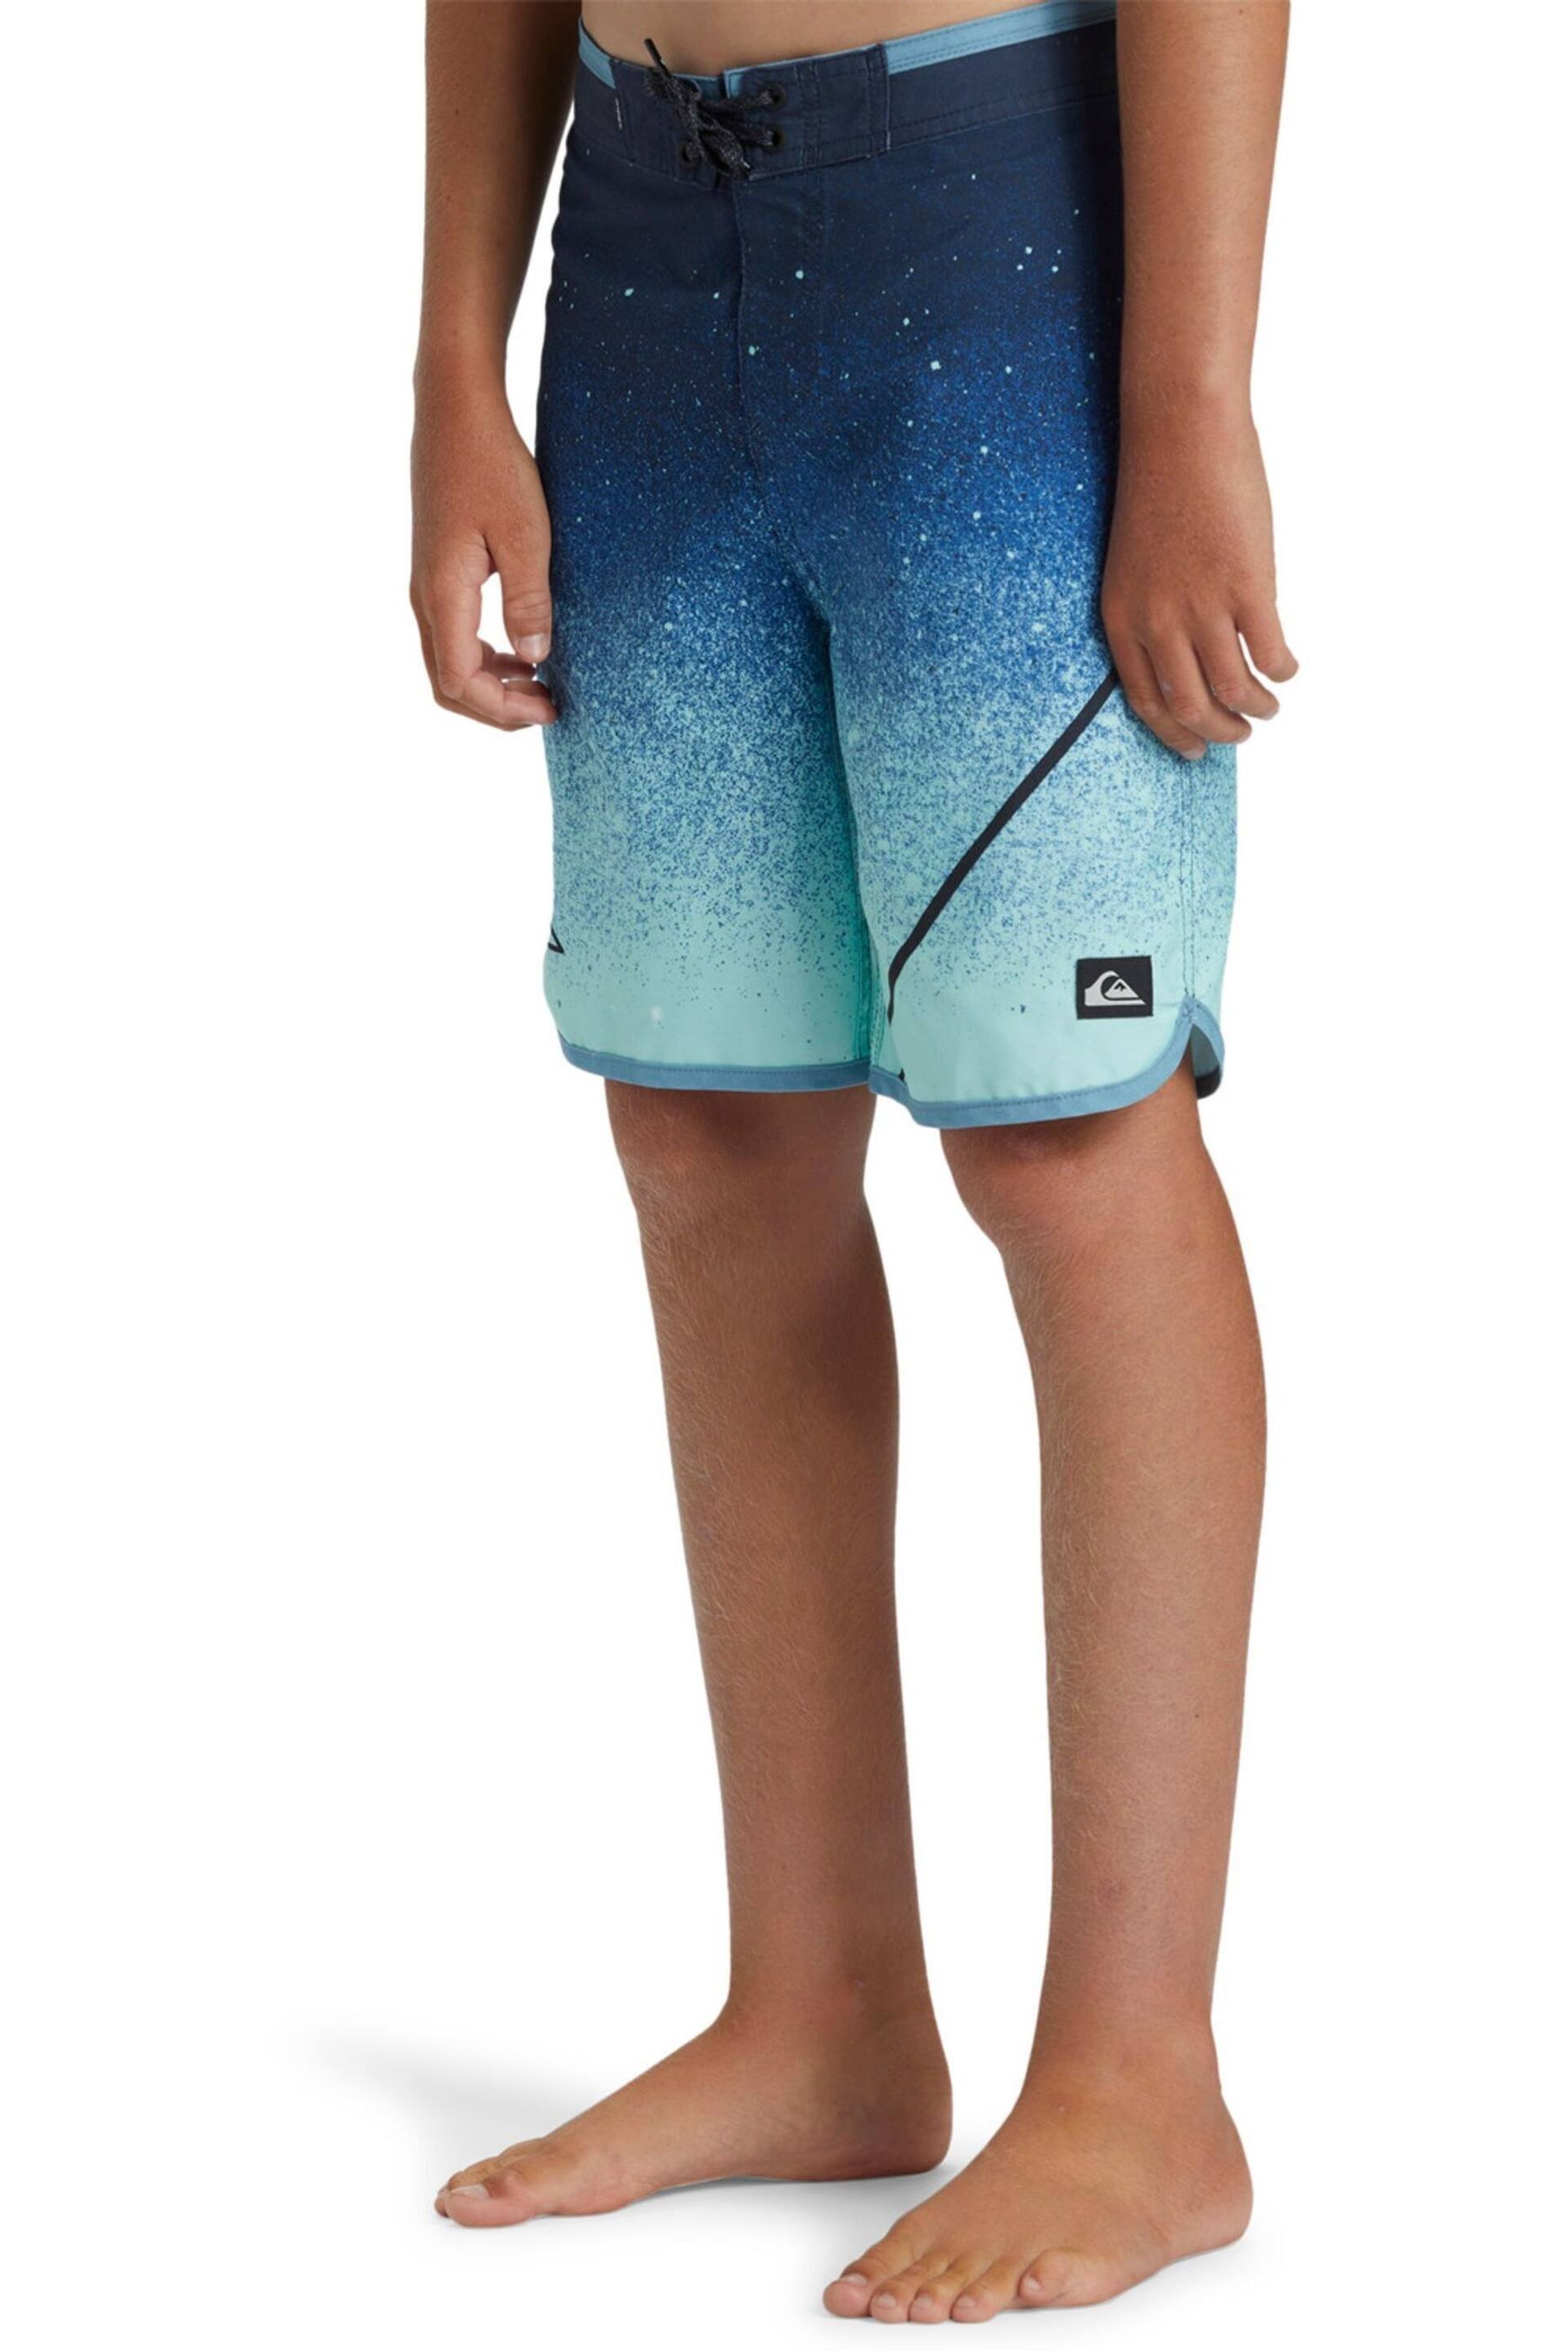 Quiksilver Boys Blue Youth Ombre Surfsilk Swim Shorts - Image 3 of 7